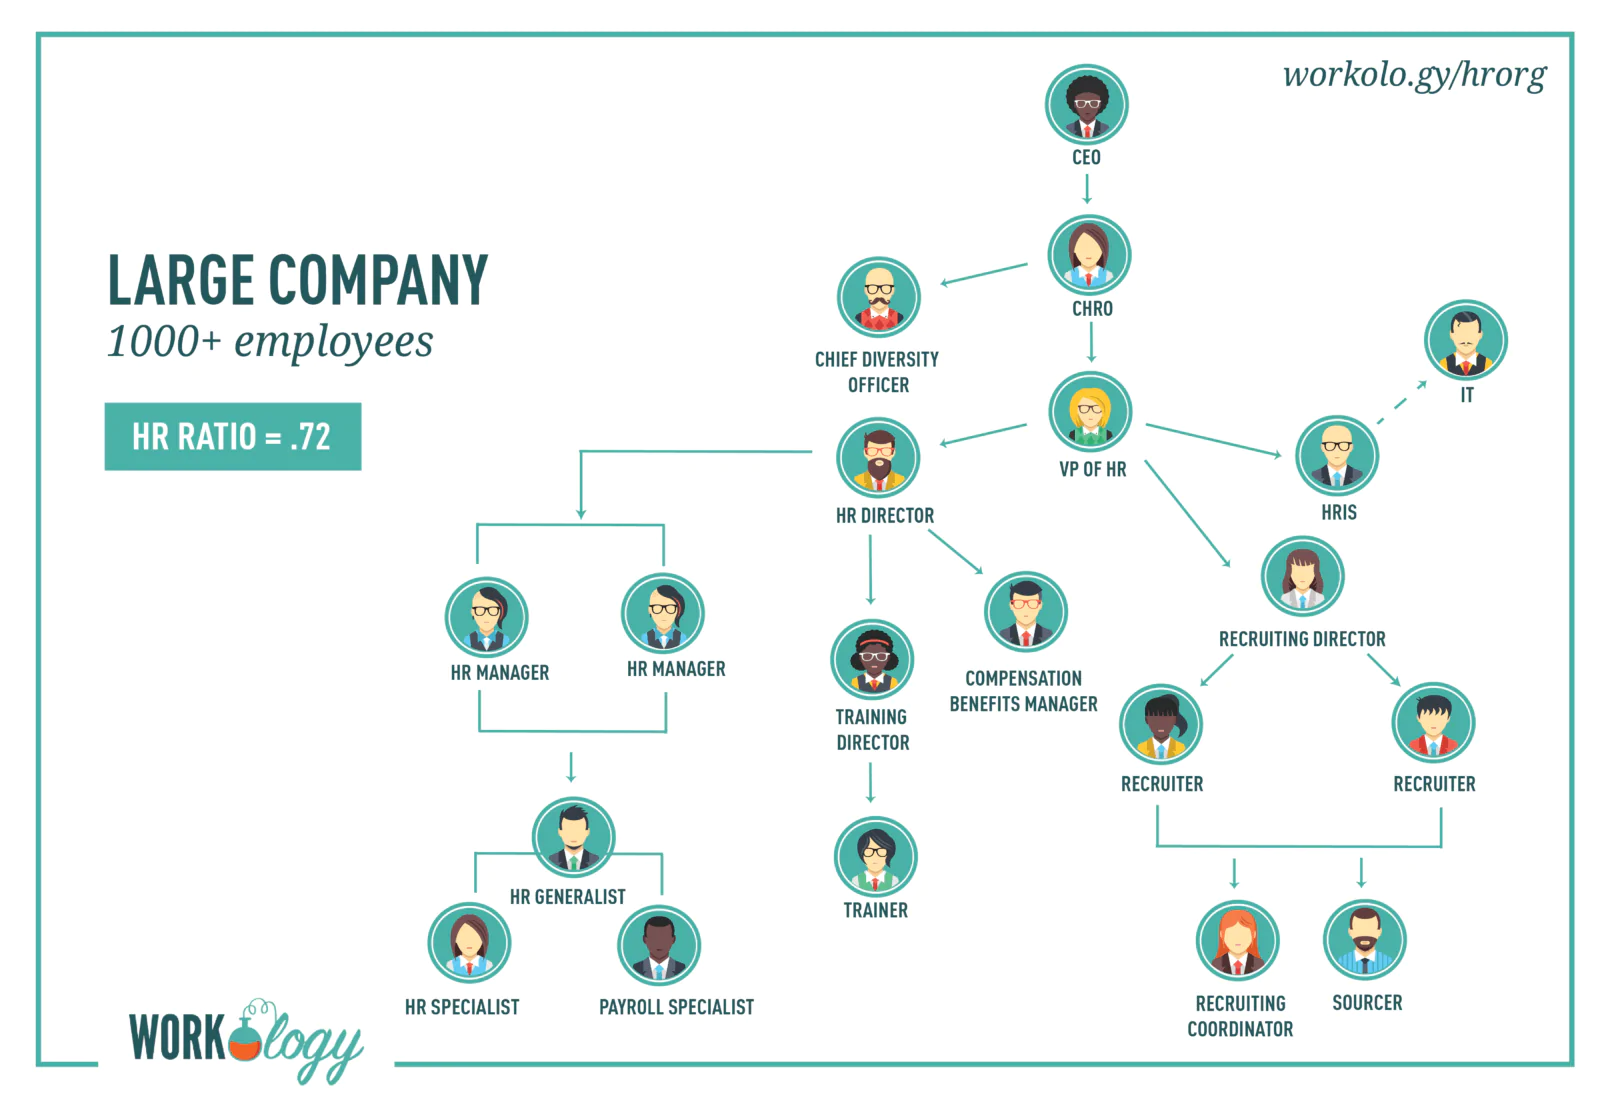 Your Guide to the HR Organizational Chart and Department ...